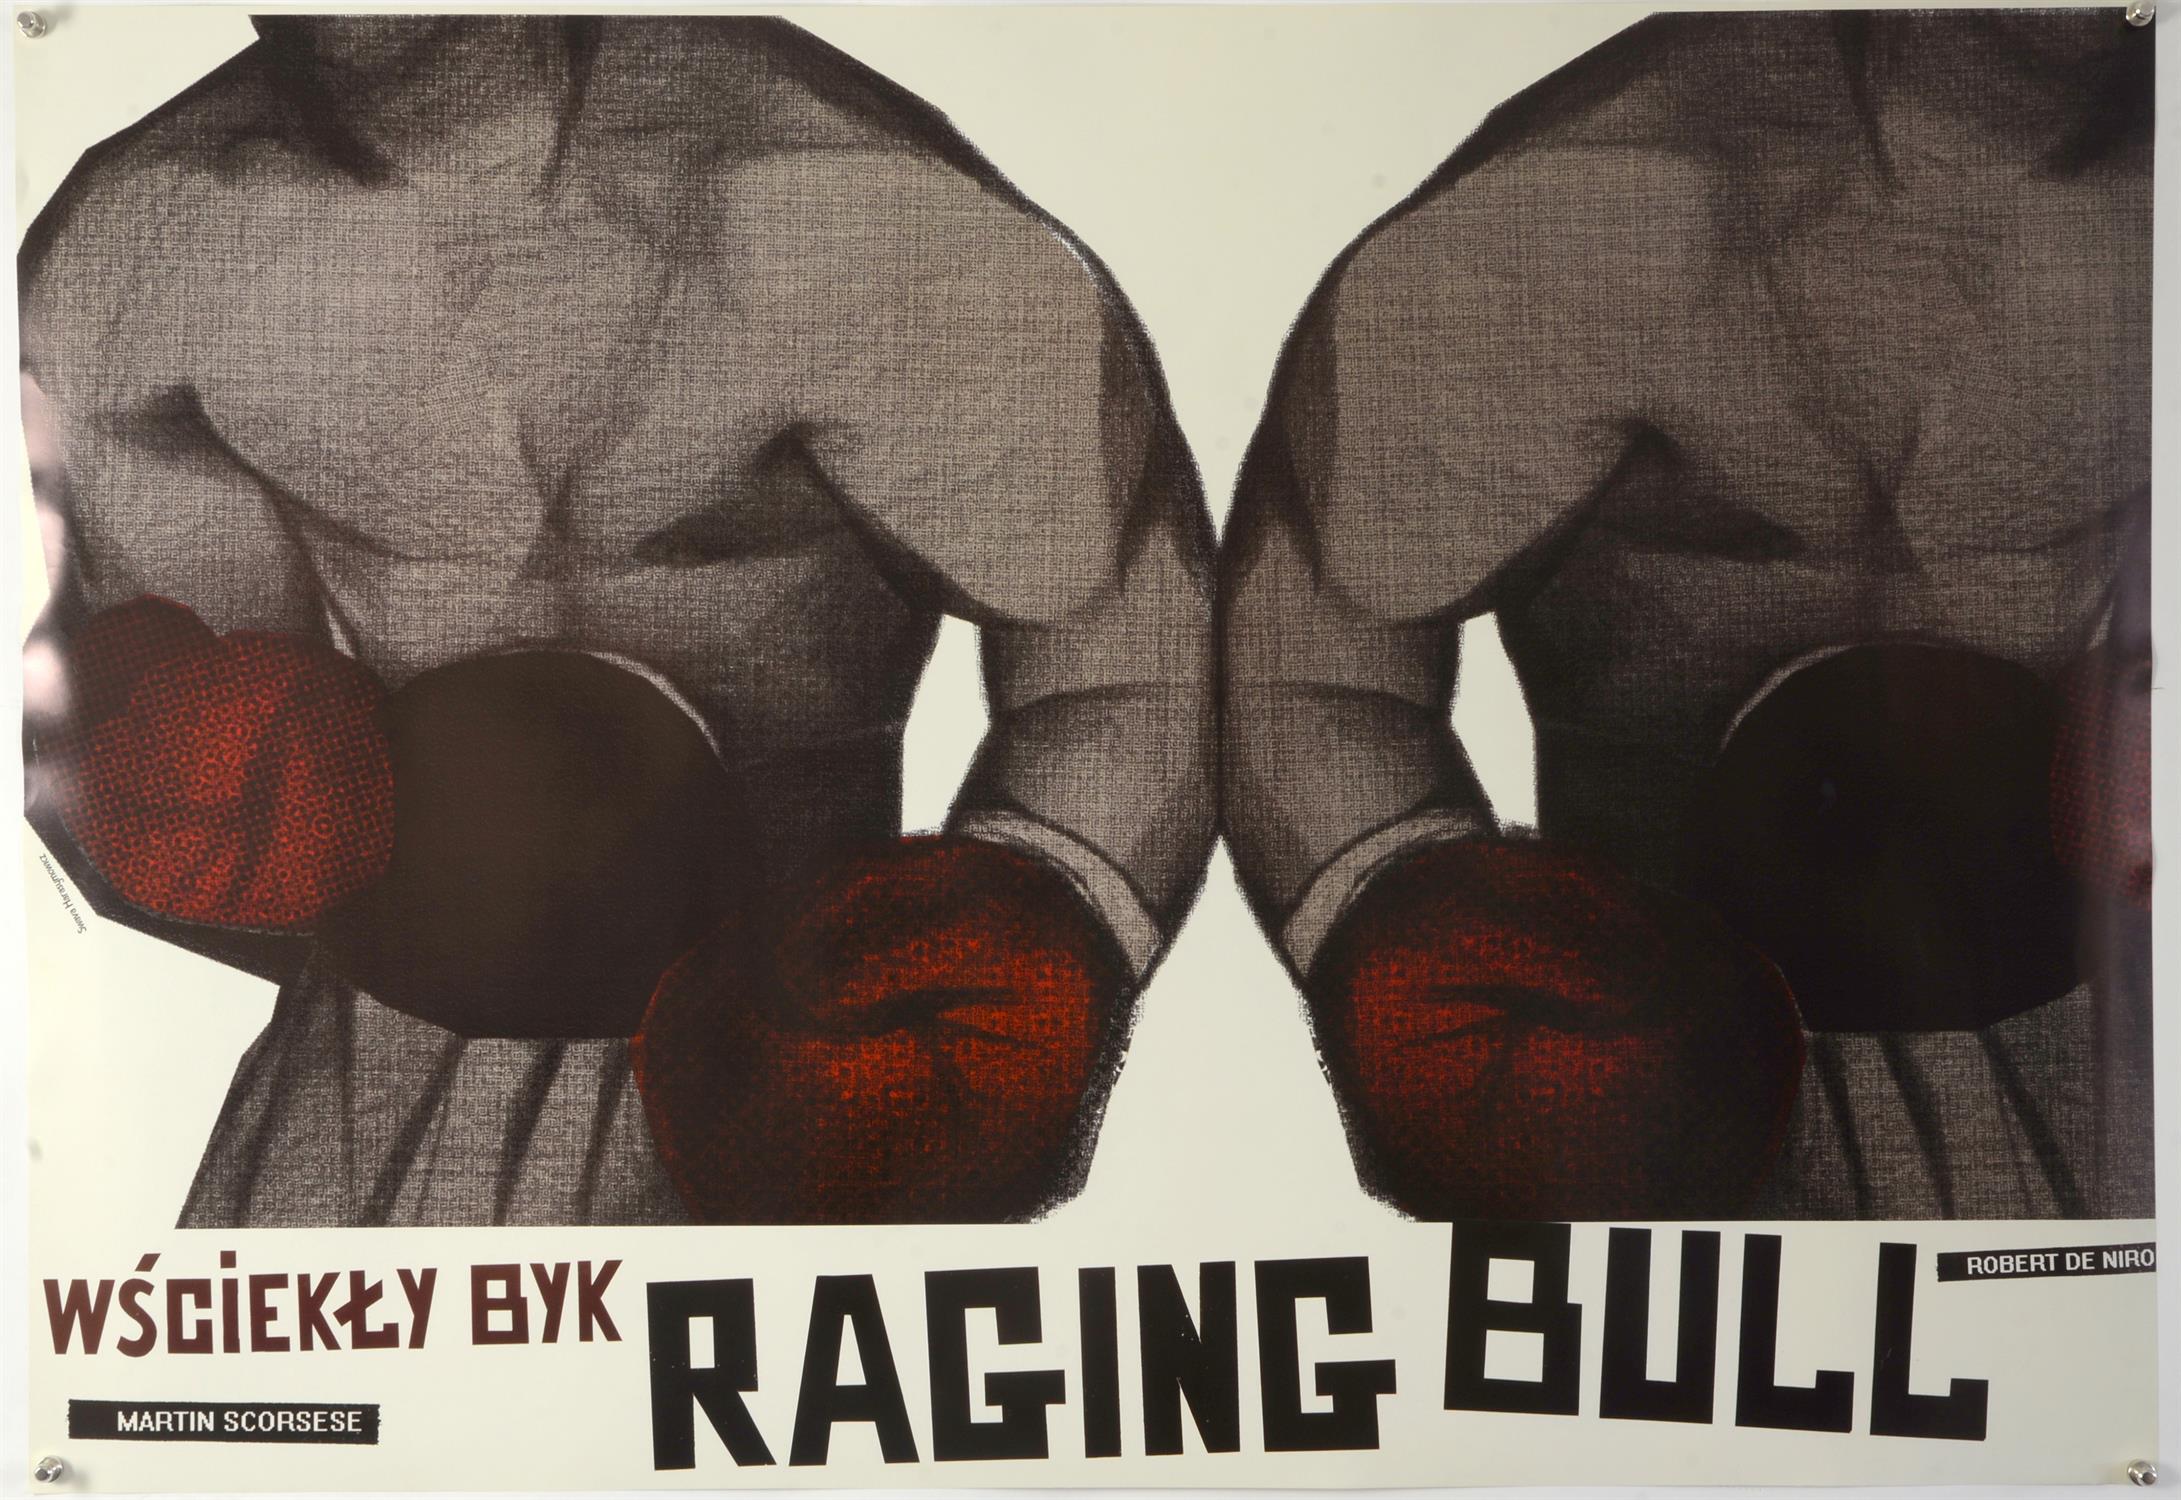 Raging Bull (R-2008) Polish commercial poster, limited edition, rolled, 27 x 39 inches.